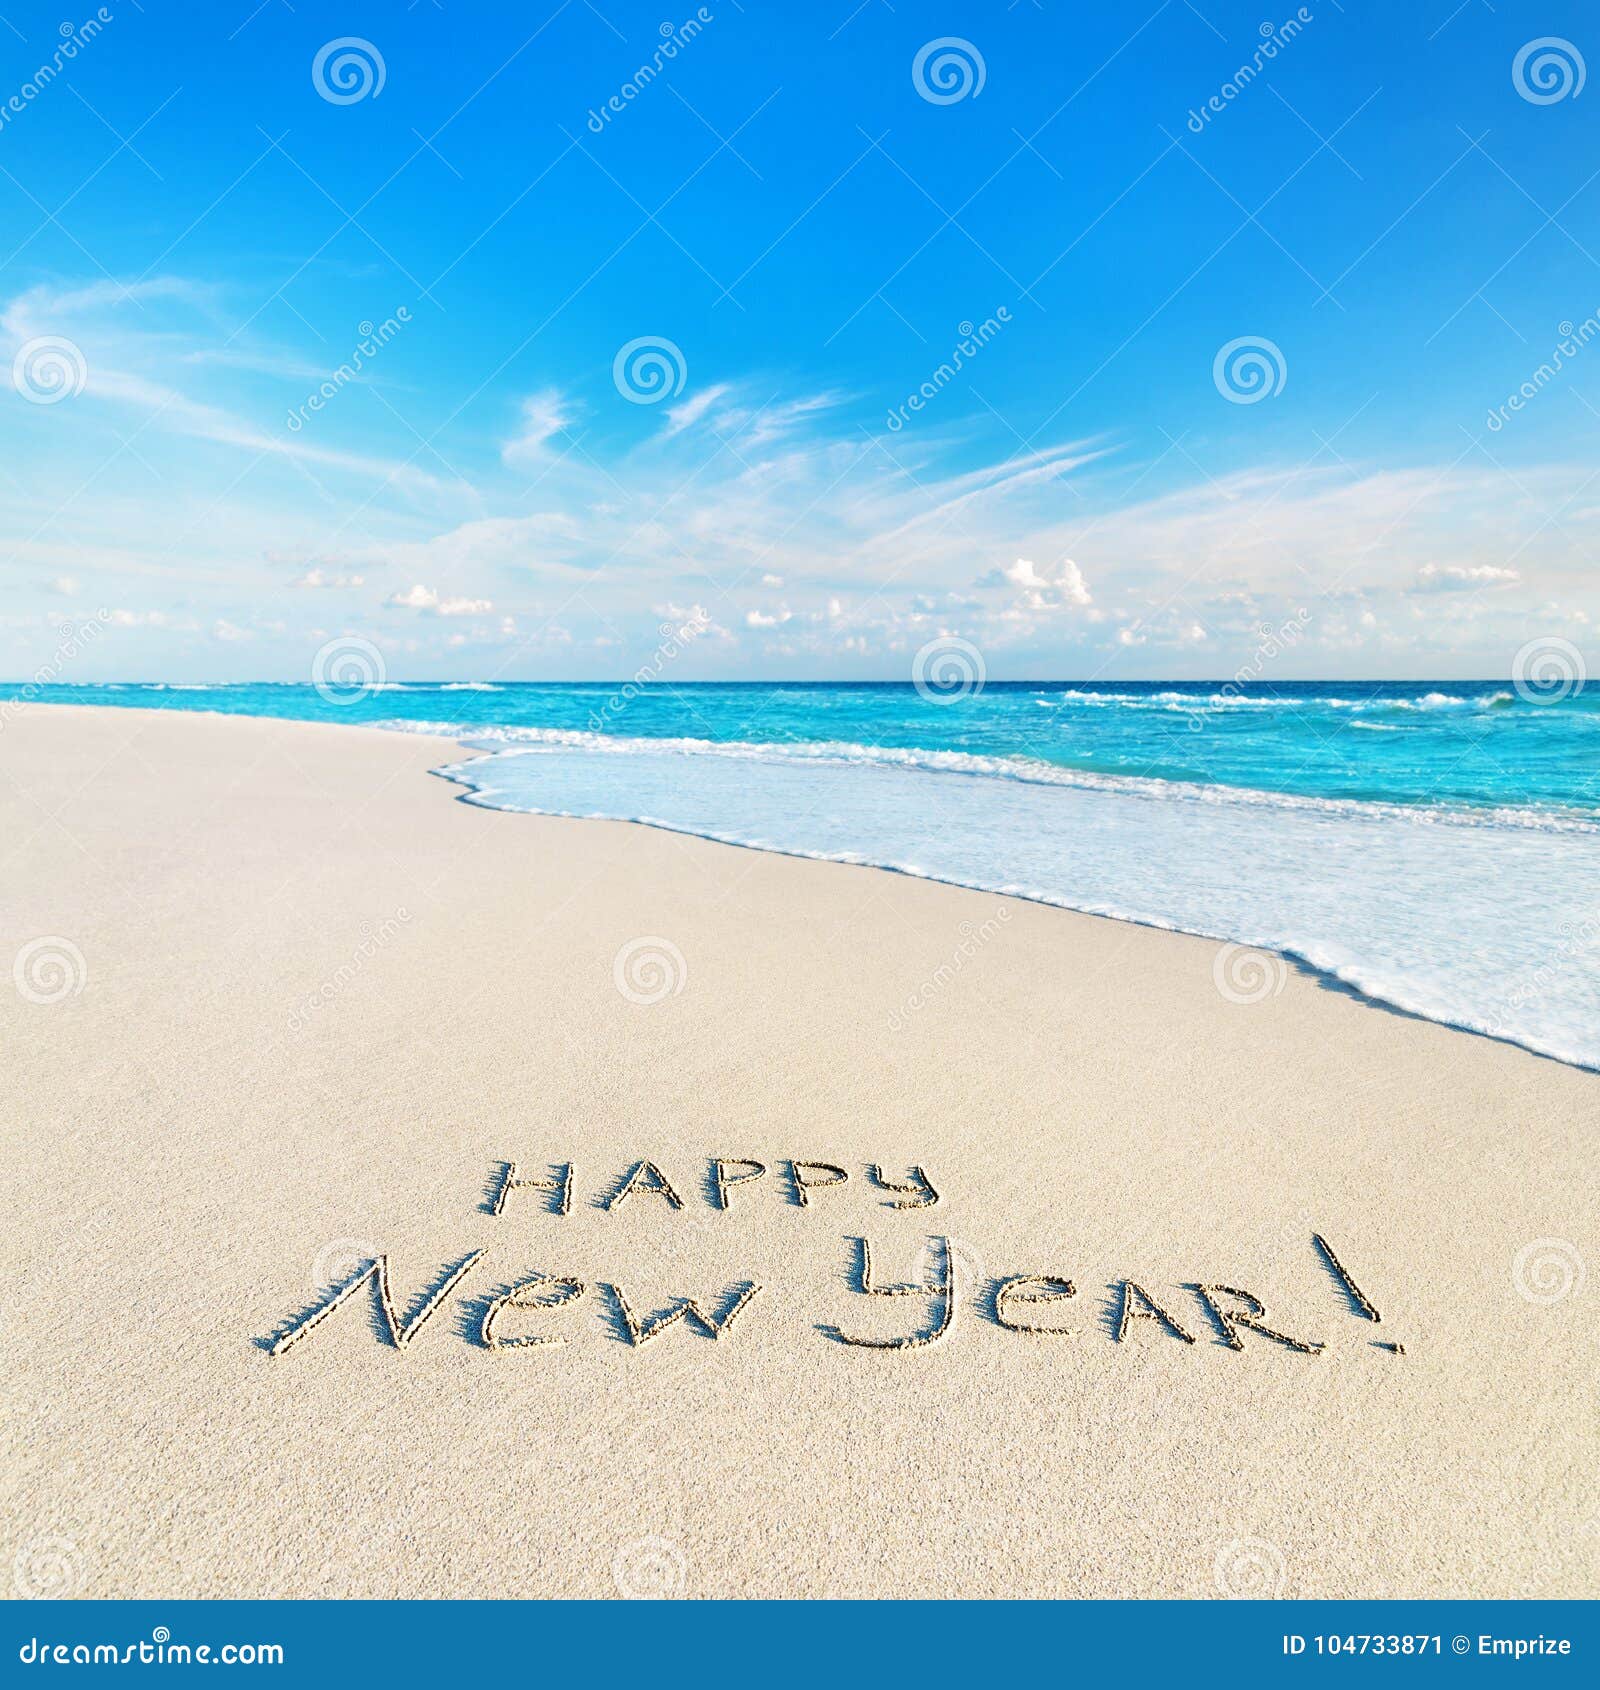 happy new year caption at tropical ocean beach against waves